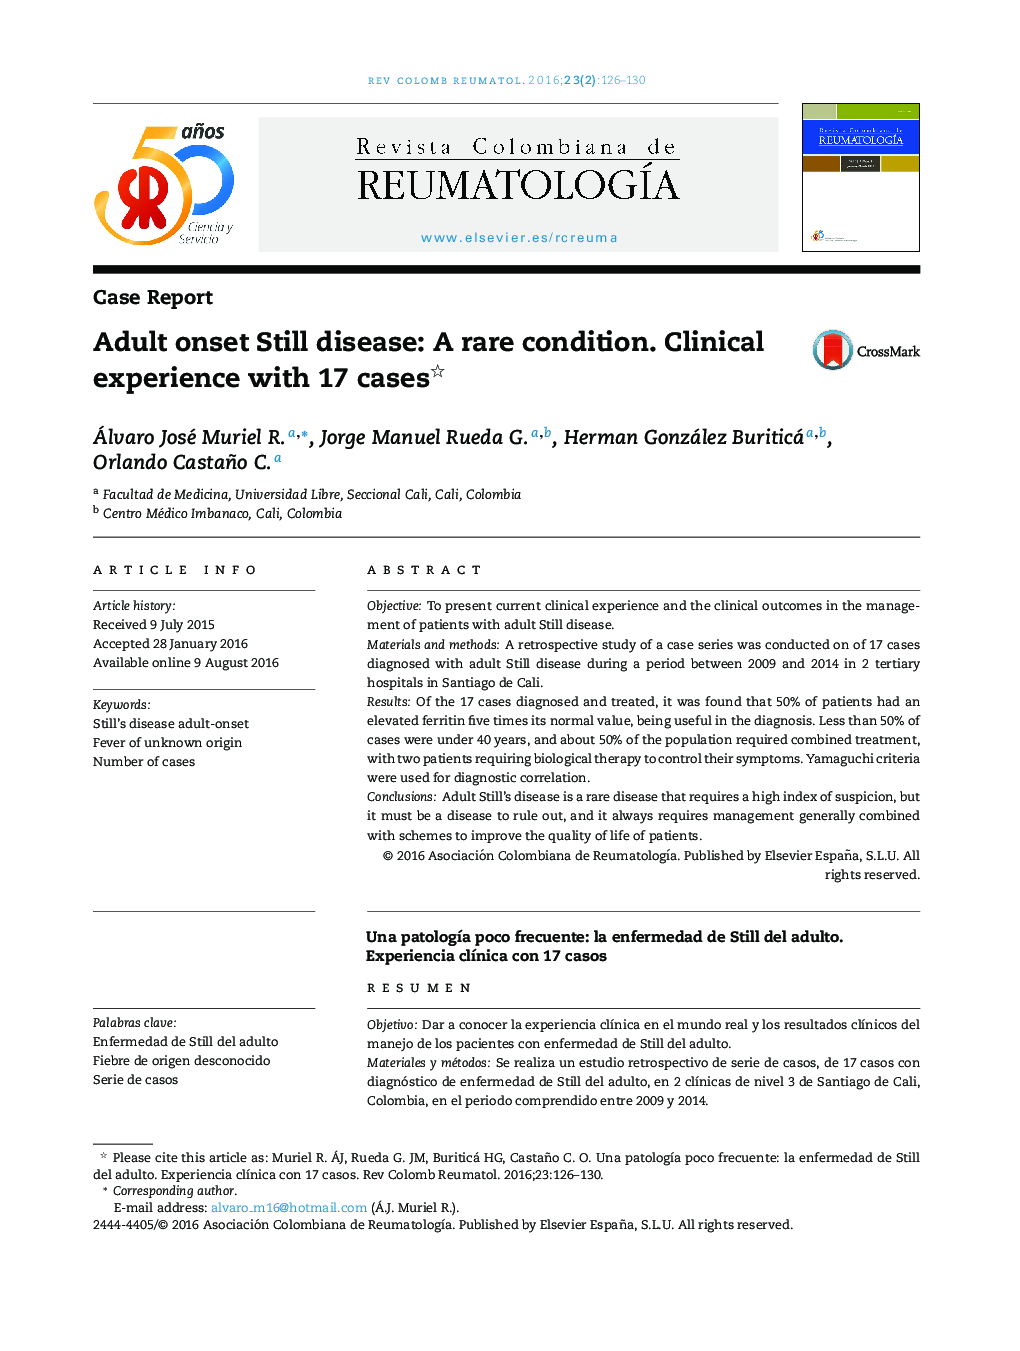 Adult onset Still disease: A rare condition. Clinical experience with 17 cases